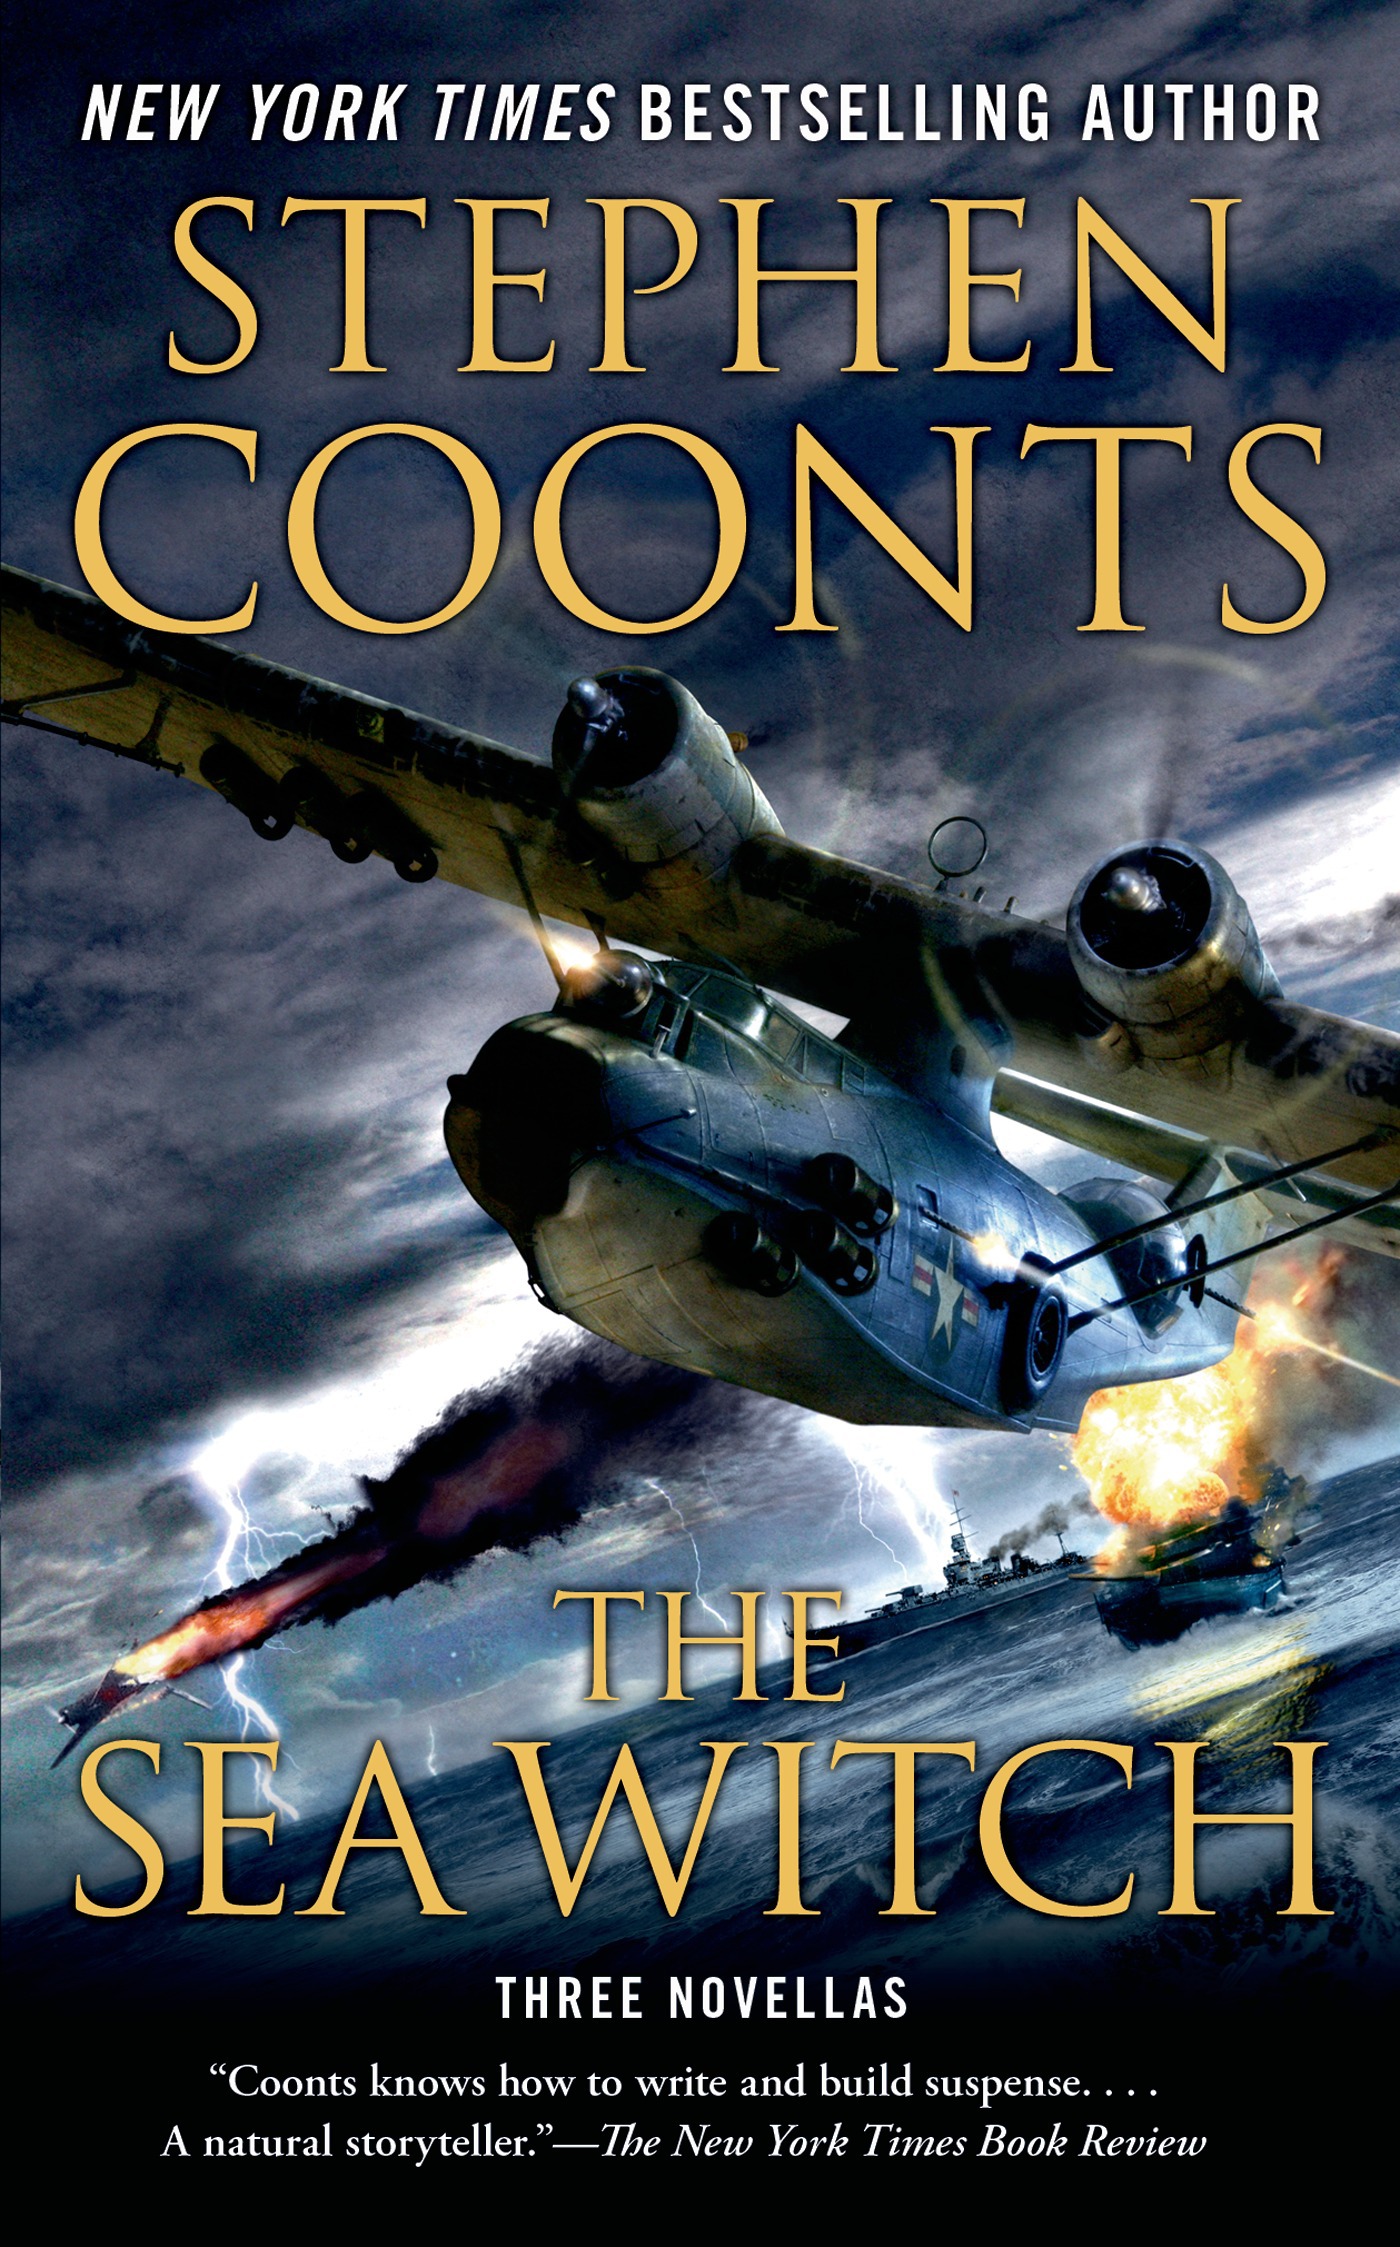 The Sea Witch : Three Novellas by Stephen Coonts